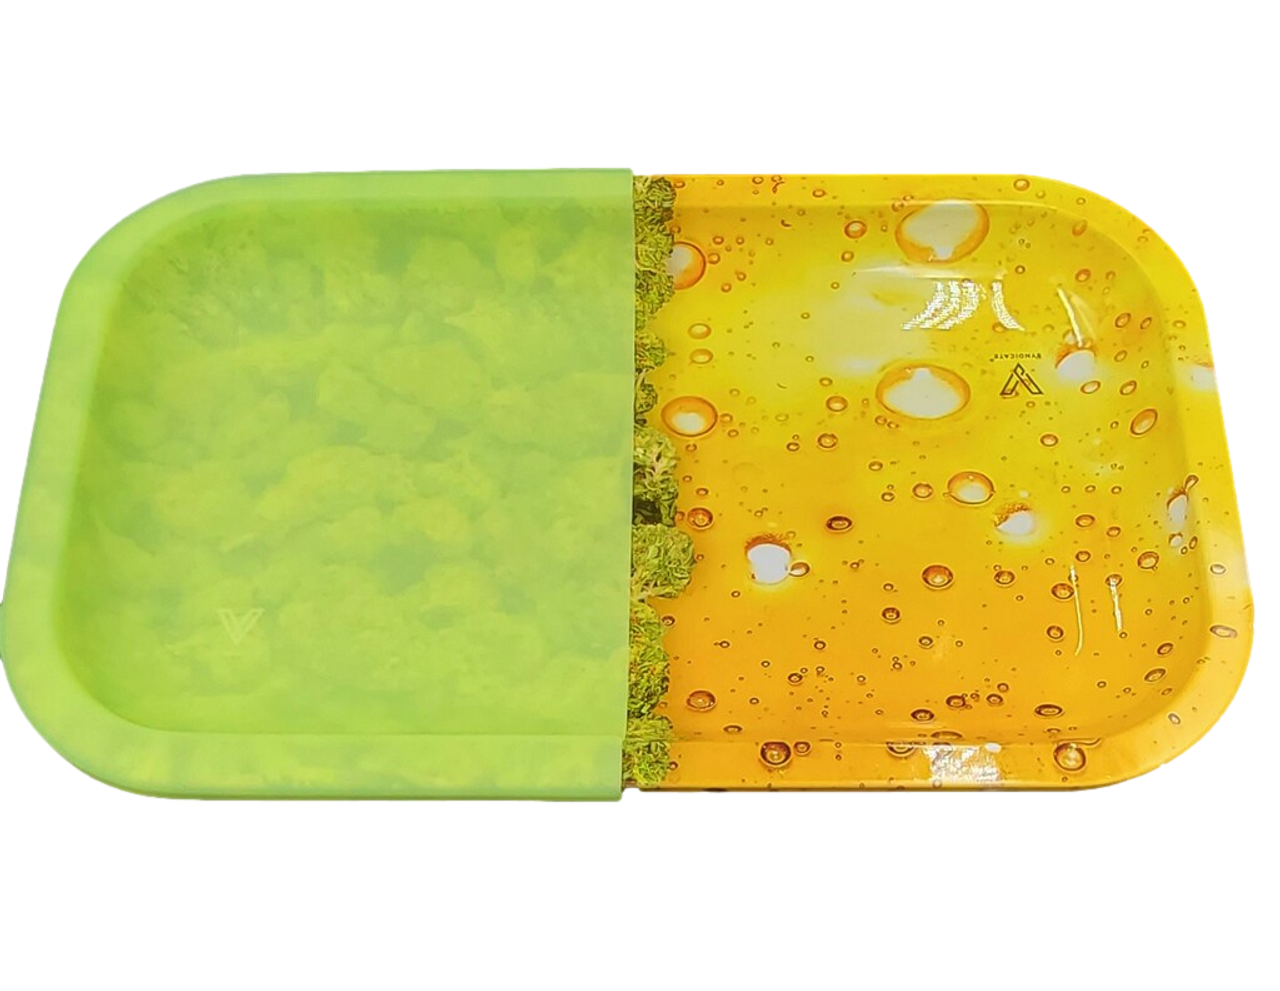 10.5" x 6.25" Metal Rolling Tray with 1/2 Removable Silicone Cover | OIL & BUD